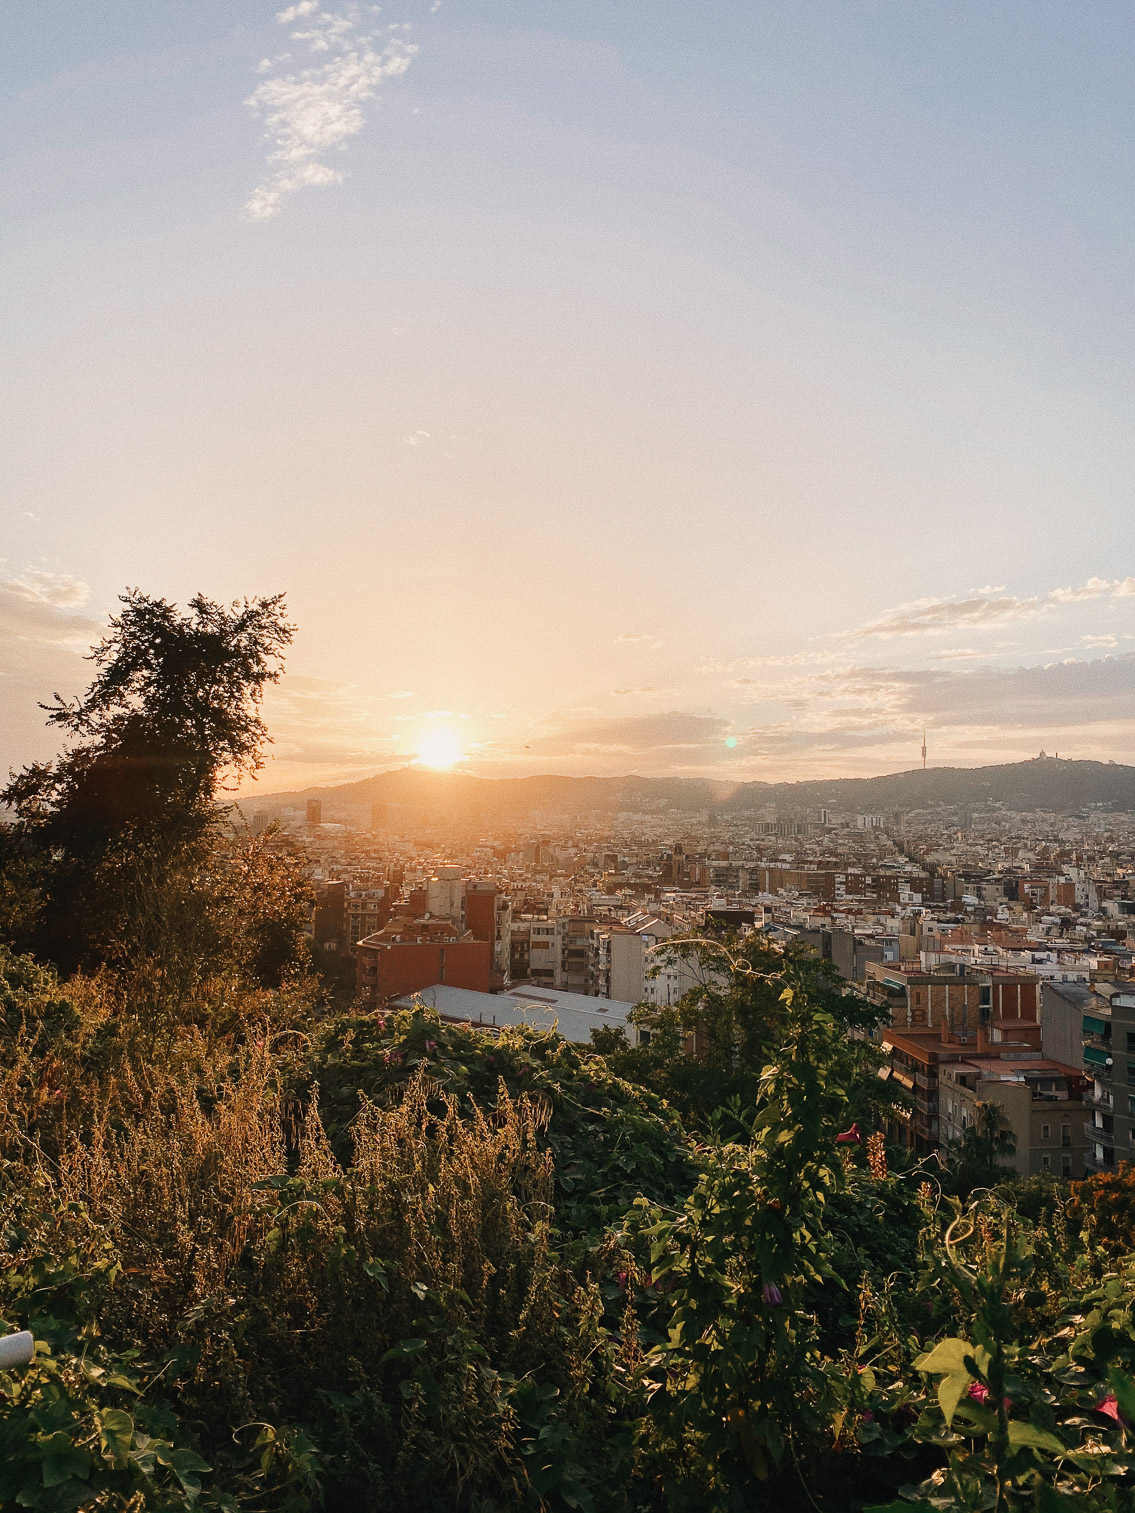 Barcelona sunset views - The cat, you and us